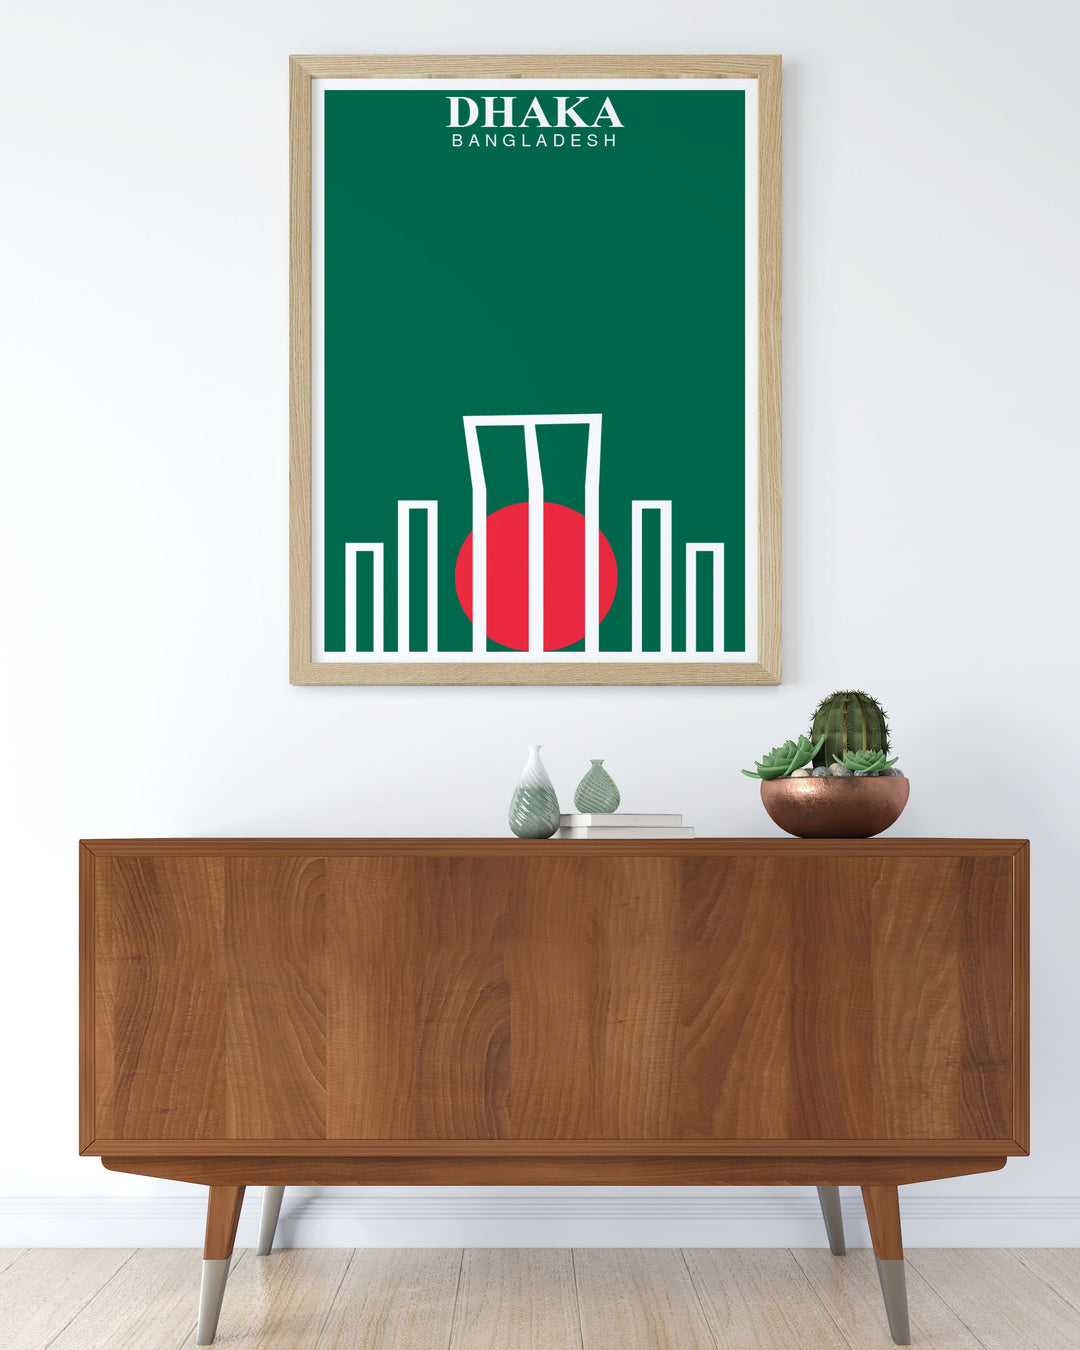 Vibrant Shaheed Minar Wall Art depicting the monuments powerful symbolism and architectural beauty. This Shaheed Minar travel poster is a perfect addition to any room bringing a touch of history and pride to your home decor while honoring Dhakas iconic site.